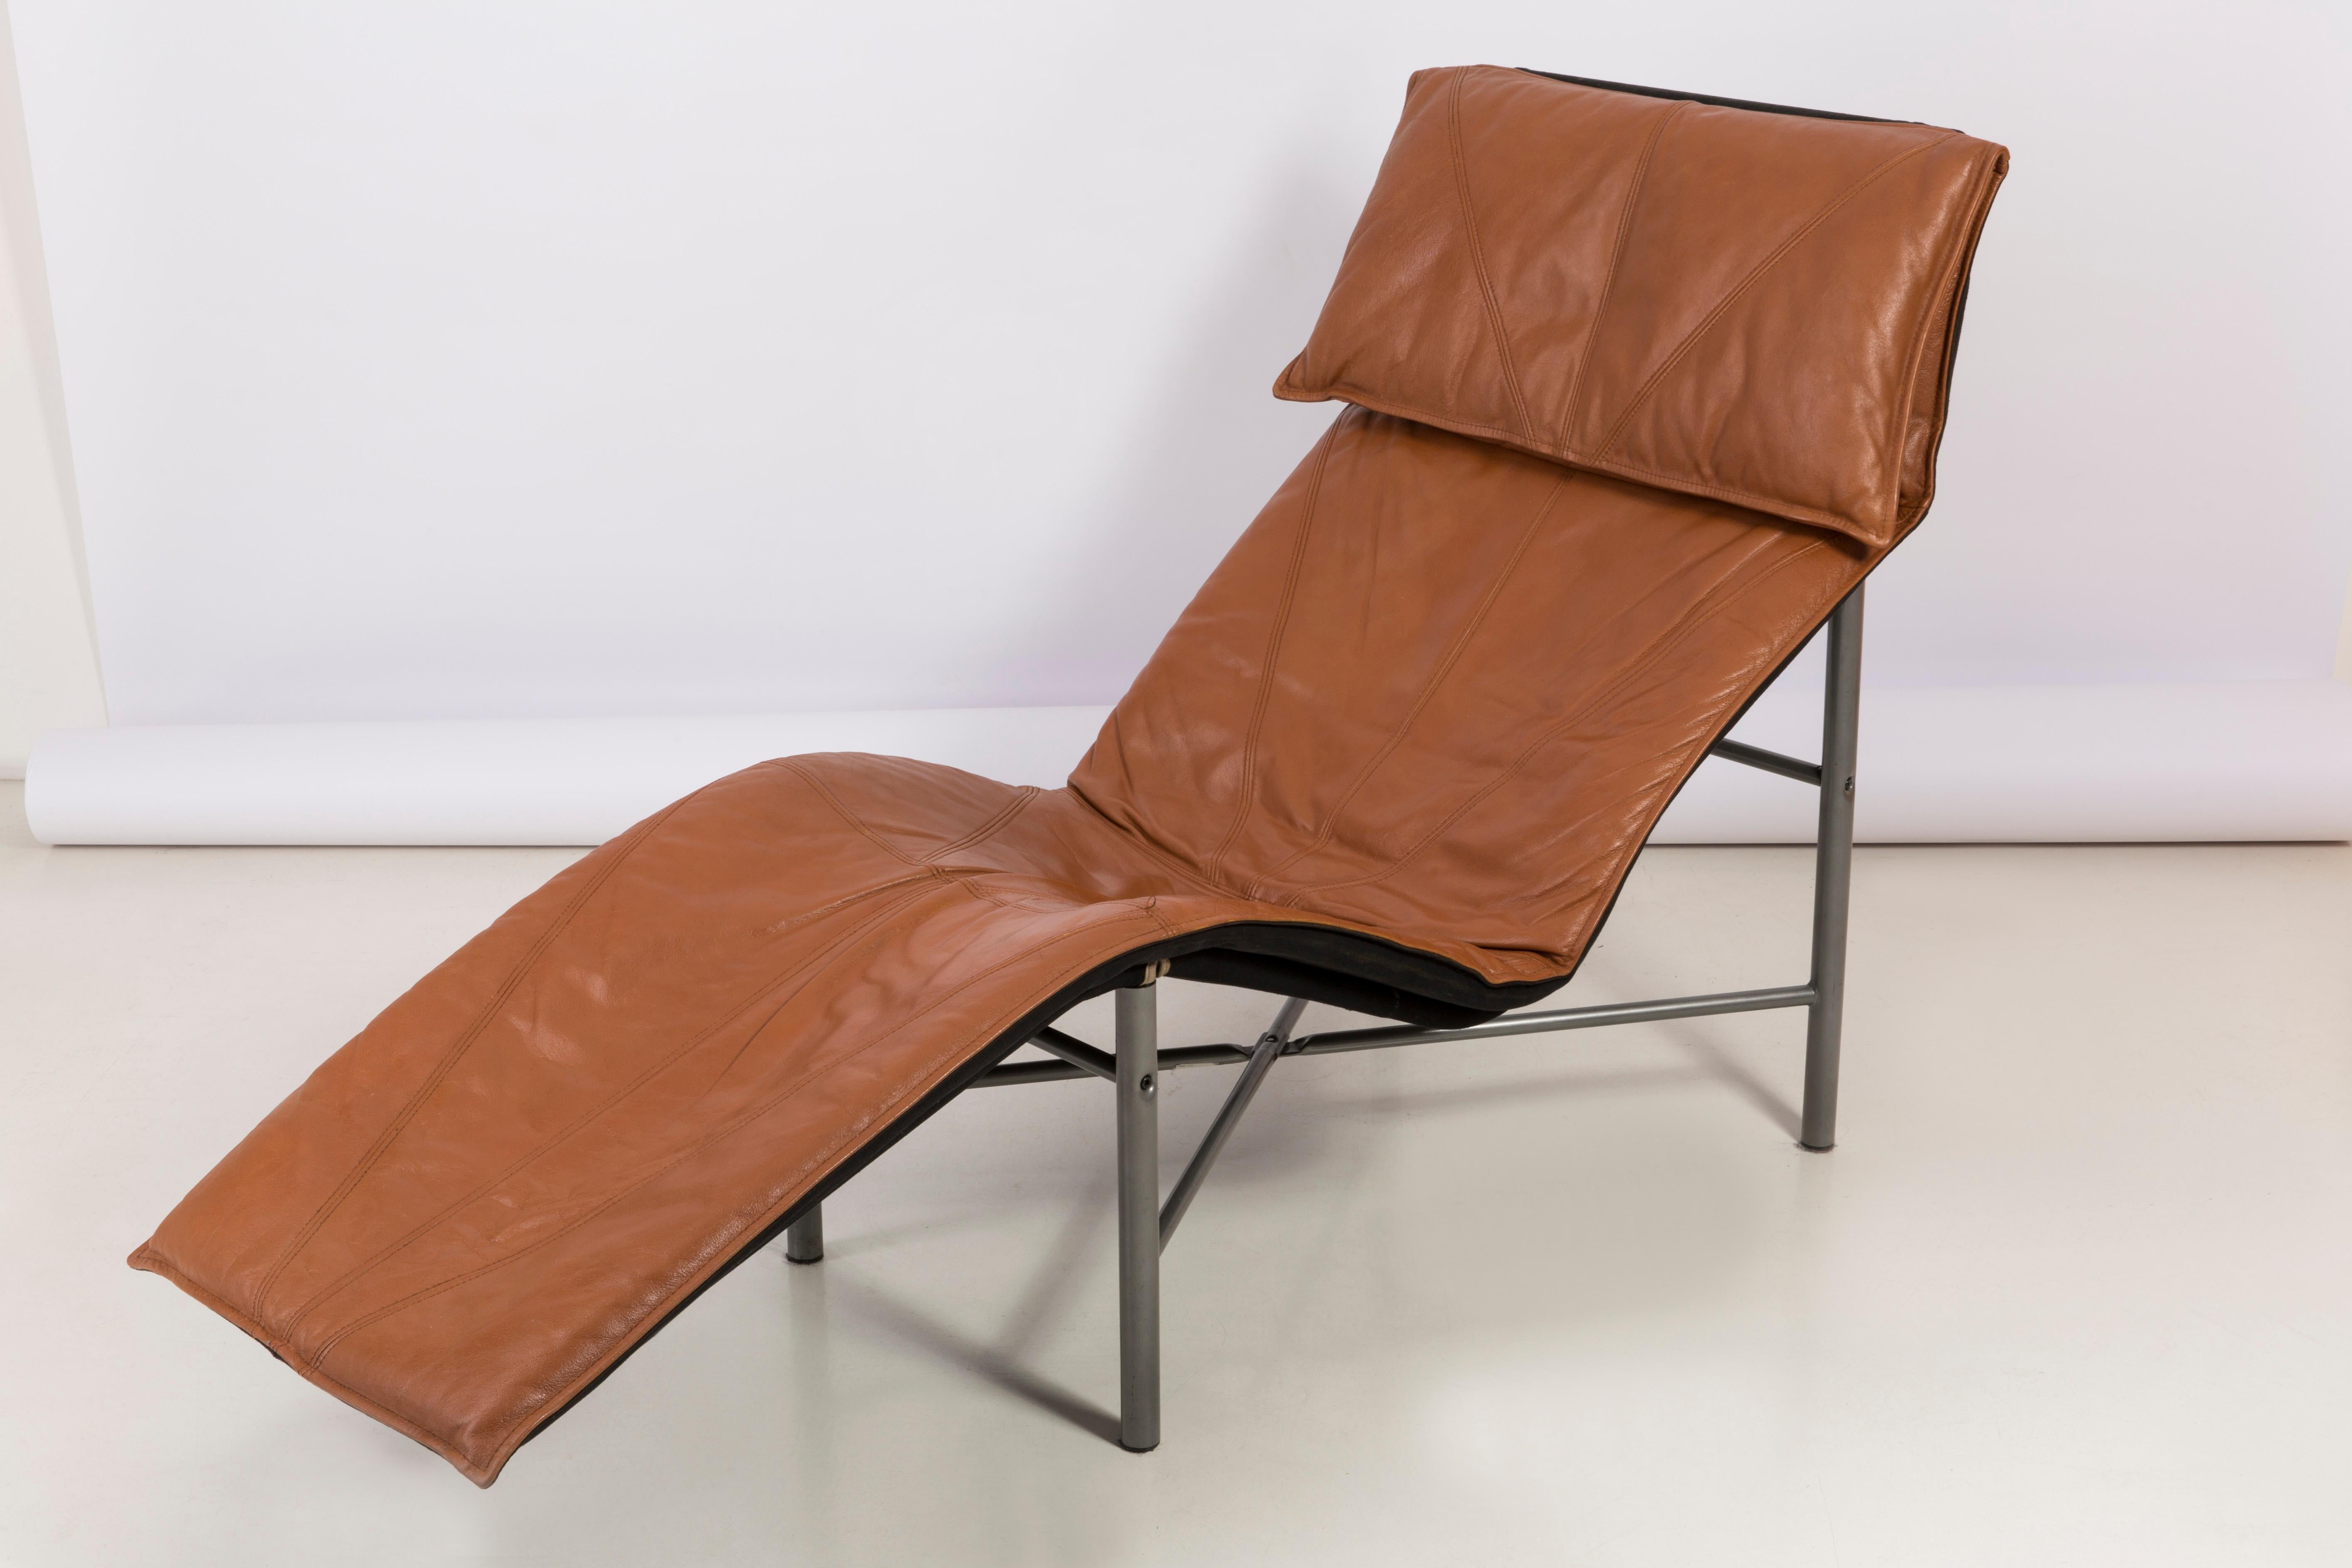 20th Century Midcentury Danish Modern Brown Leather Chaise Lounge Chair by Tord Björklund For Sale